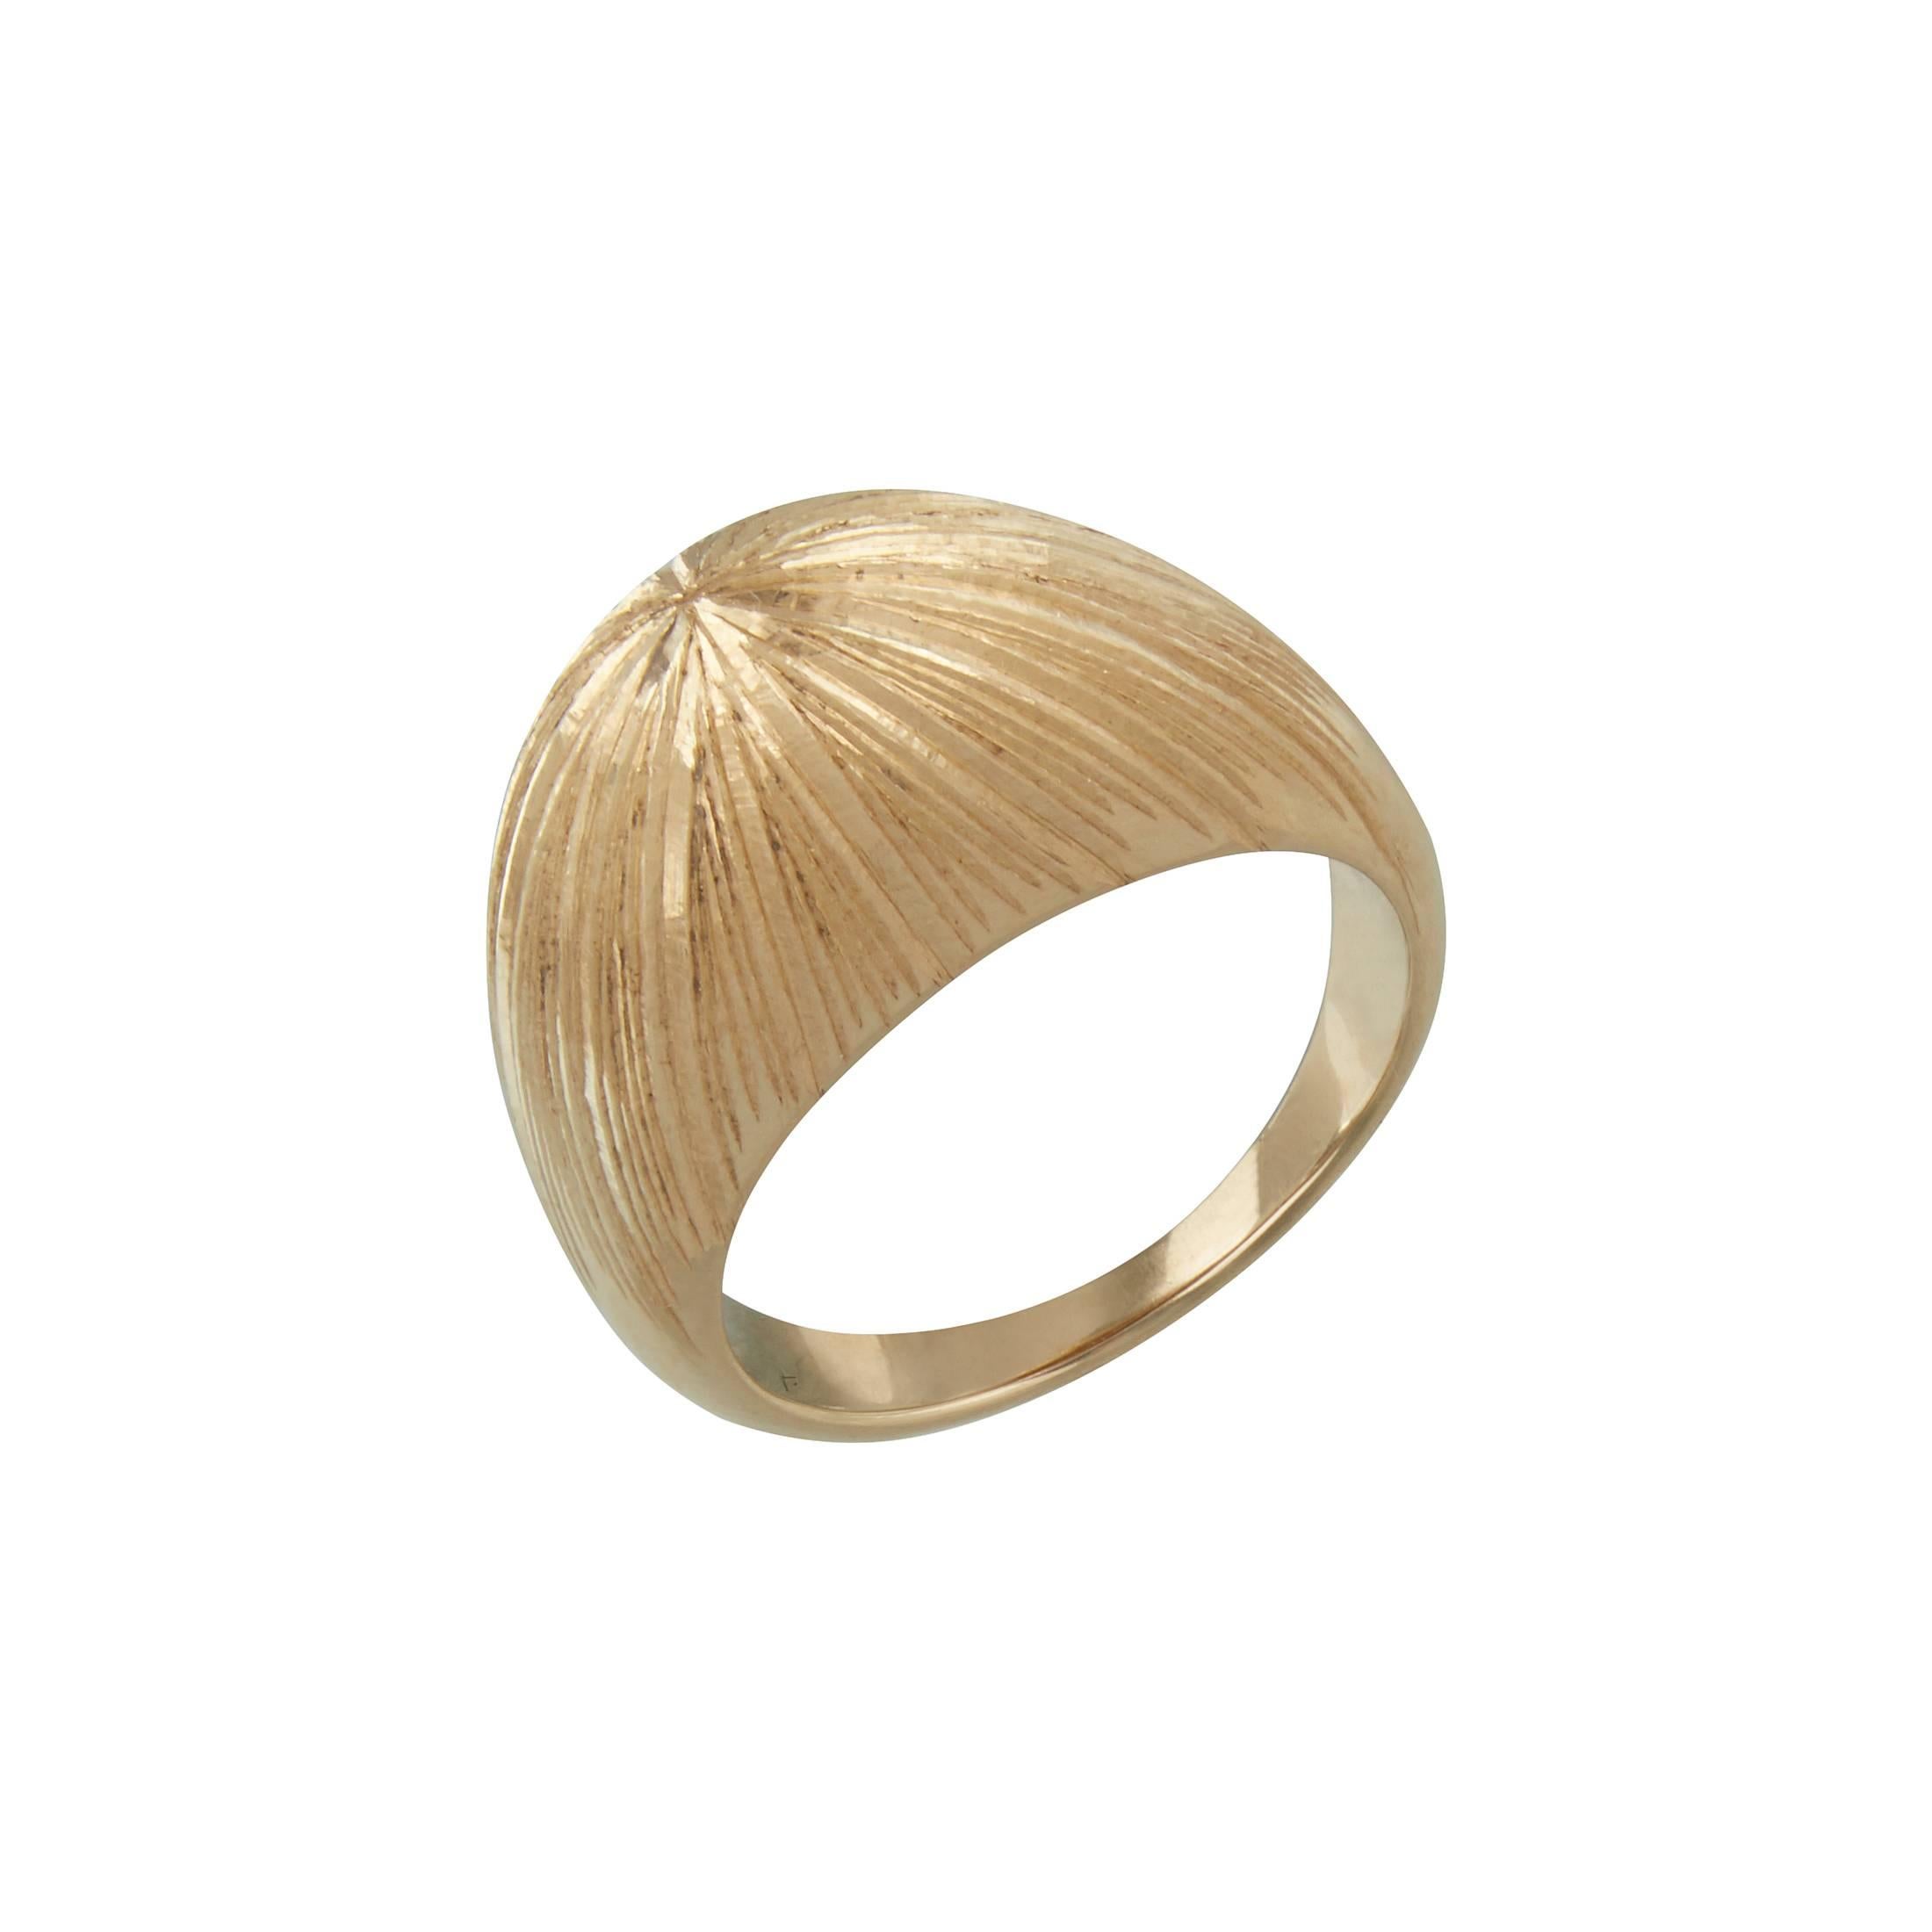 Zara Simon Hand Engraved Gold Rio Ring In New Condition For Sale In London, GB